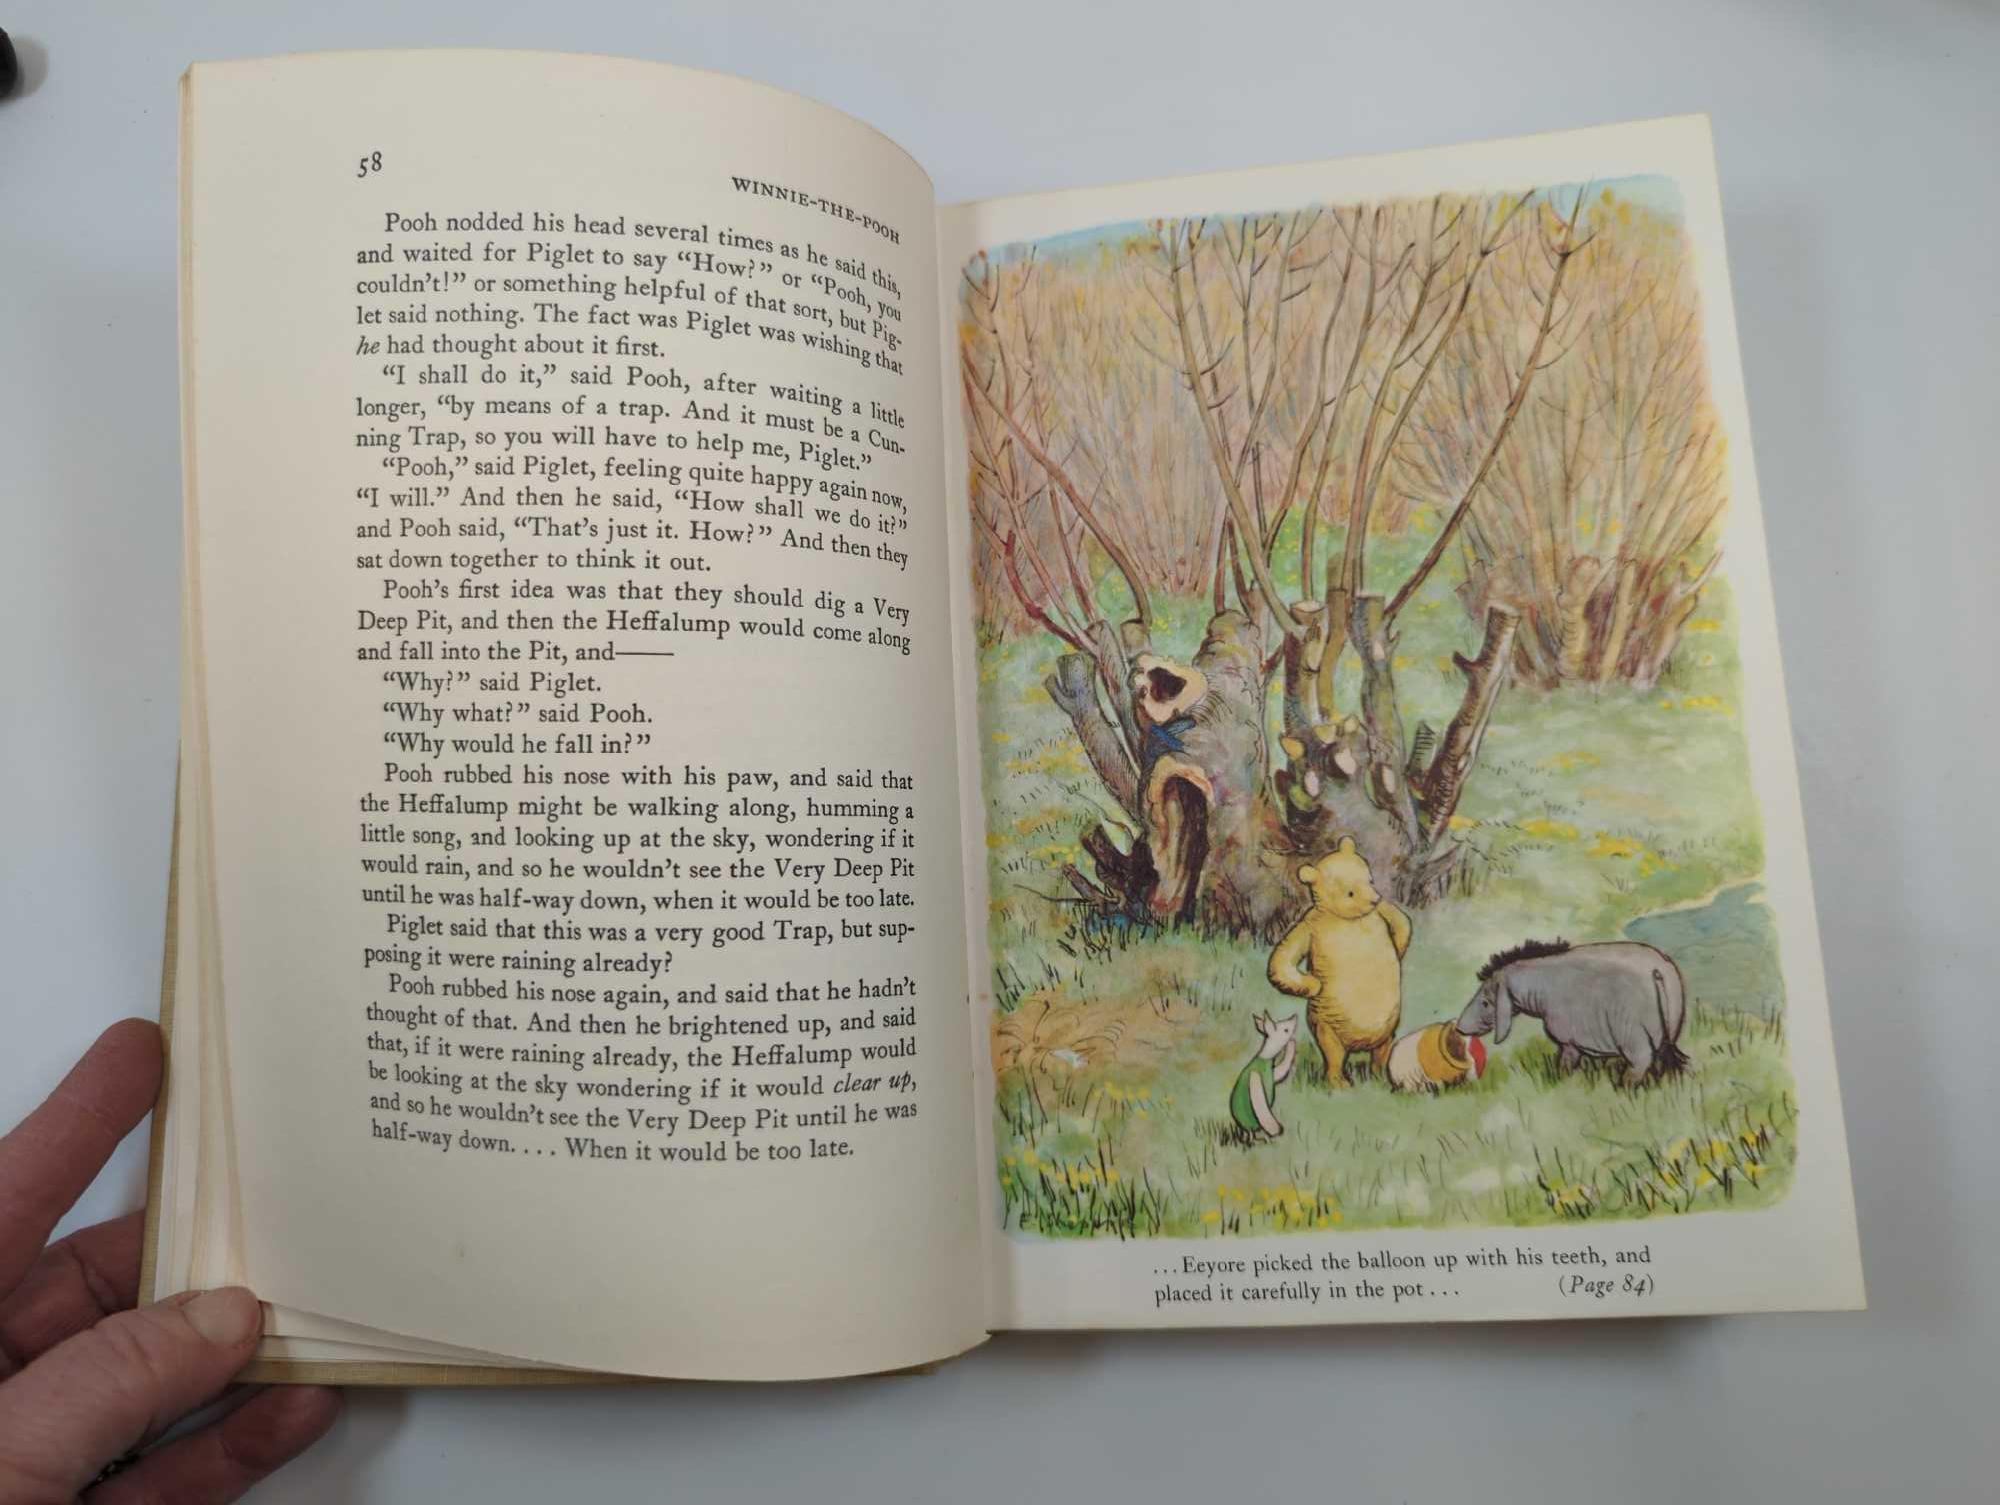 THE WORLD OF POOH BY A. A. MILNE